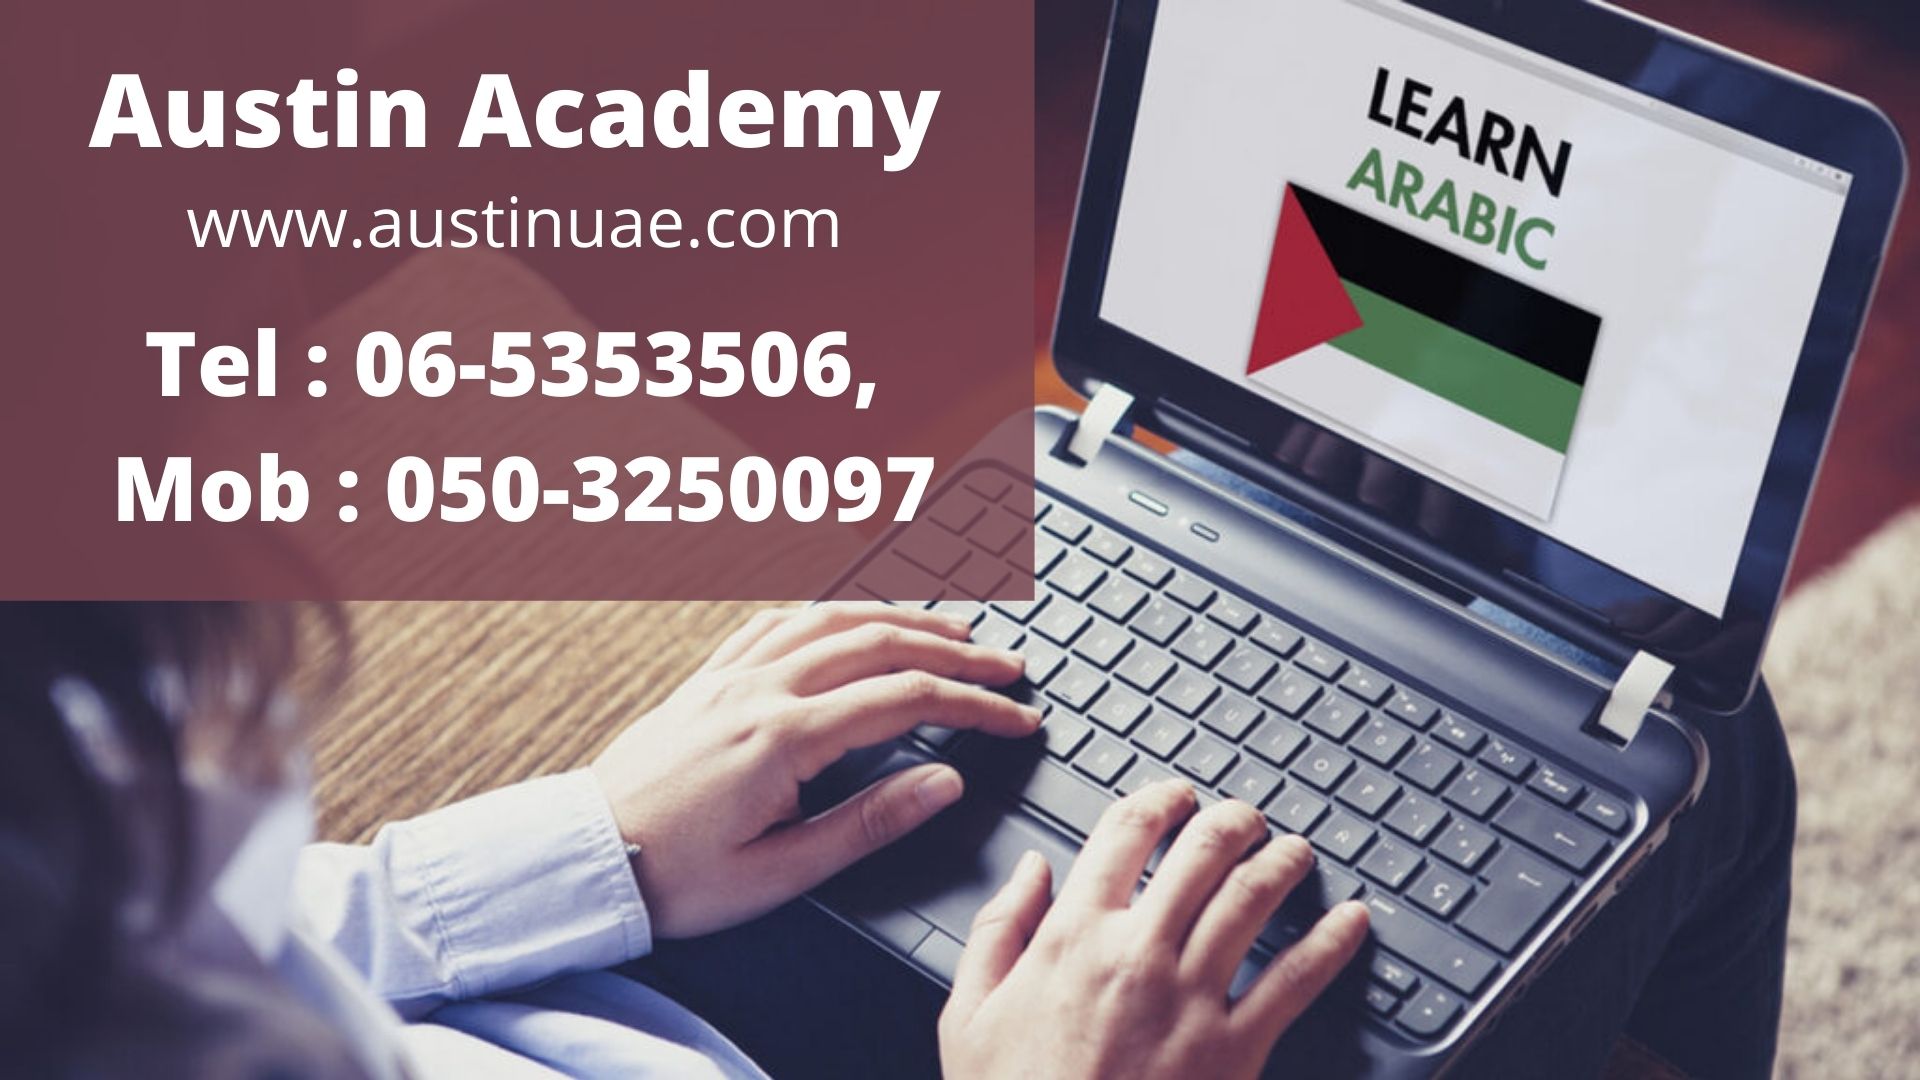 Spoken Arabic Classes In Sharjah With Best Offer Call 058 8197415